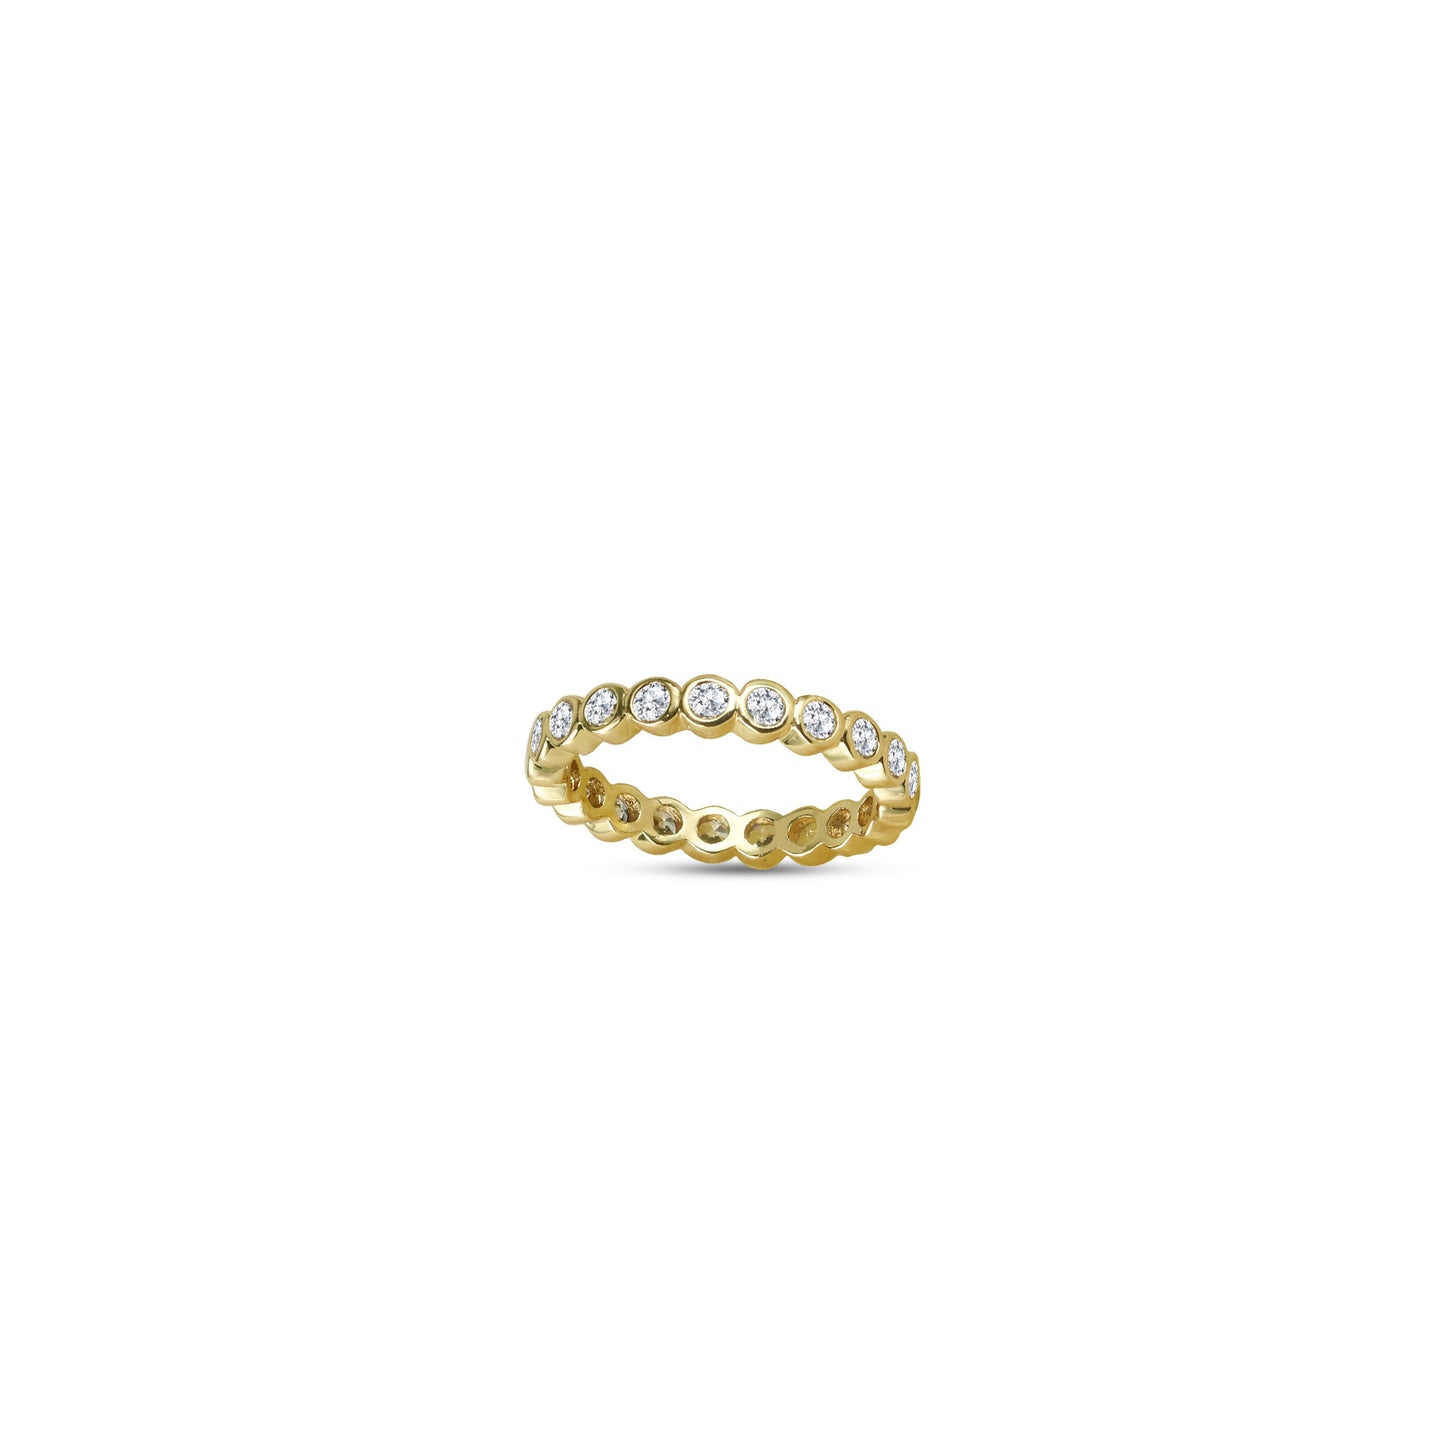 The Endlessly Stacking Ring